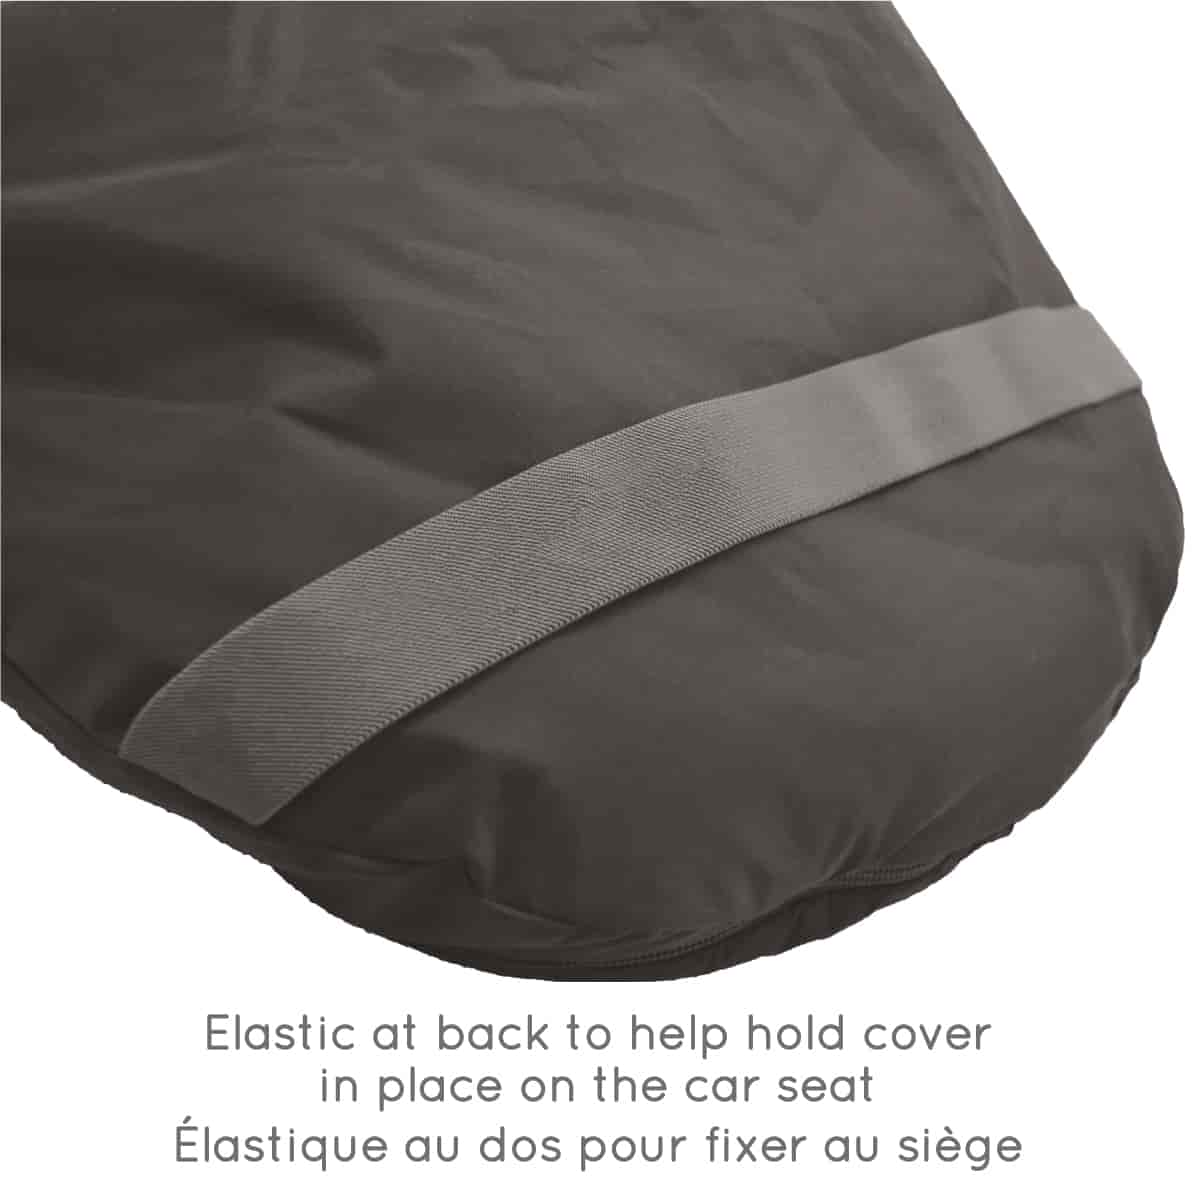 Baby car seat cover for winter - Mountains